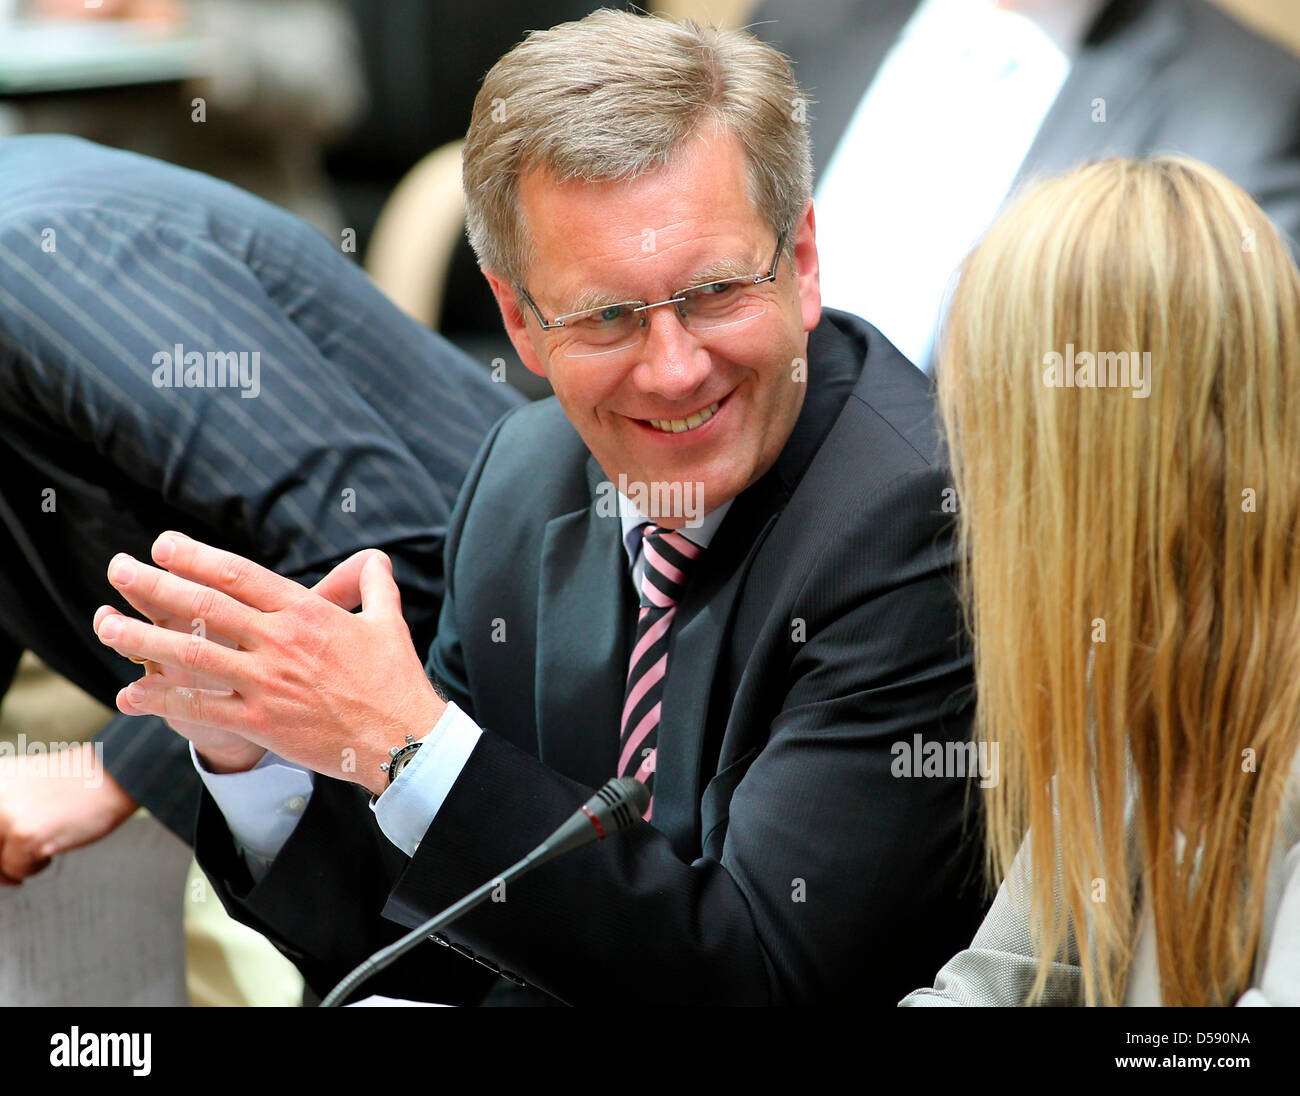 Lower Saxony's Prime Minister Christian Wulff (CDU), candidate for the office of German President, attends a session of the German Bundesrat in Berlin, Germany, 04 June 2010. Next to Wulff sits parliamentary state secretary Martina Krogmann, head of the representation of Lower Saxony in the German federation. Photo: WOLFGANG KUMM Stock Photo